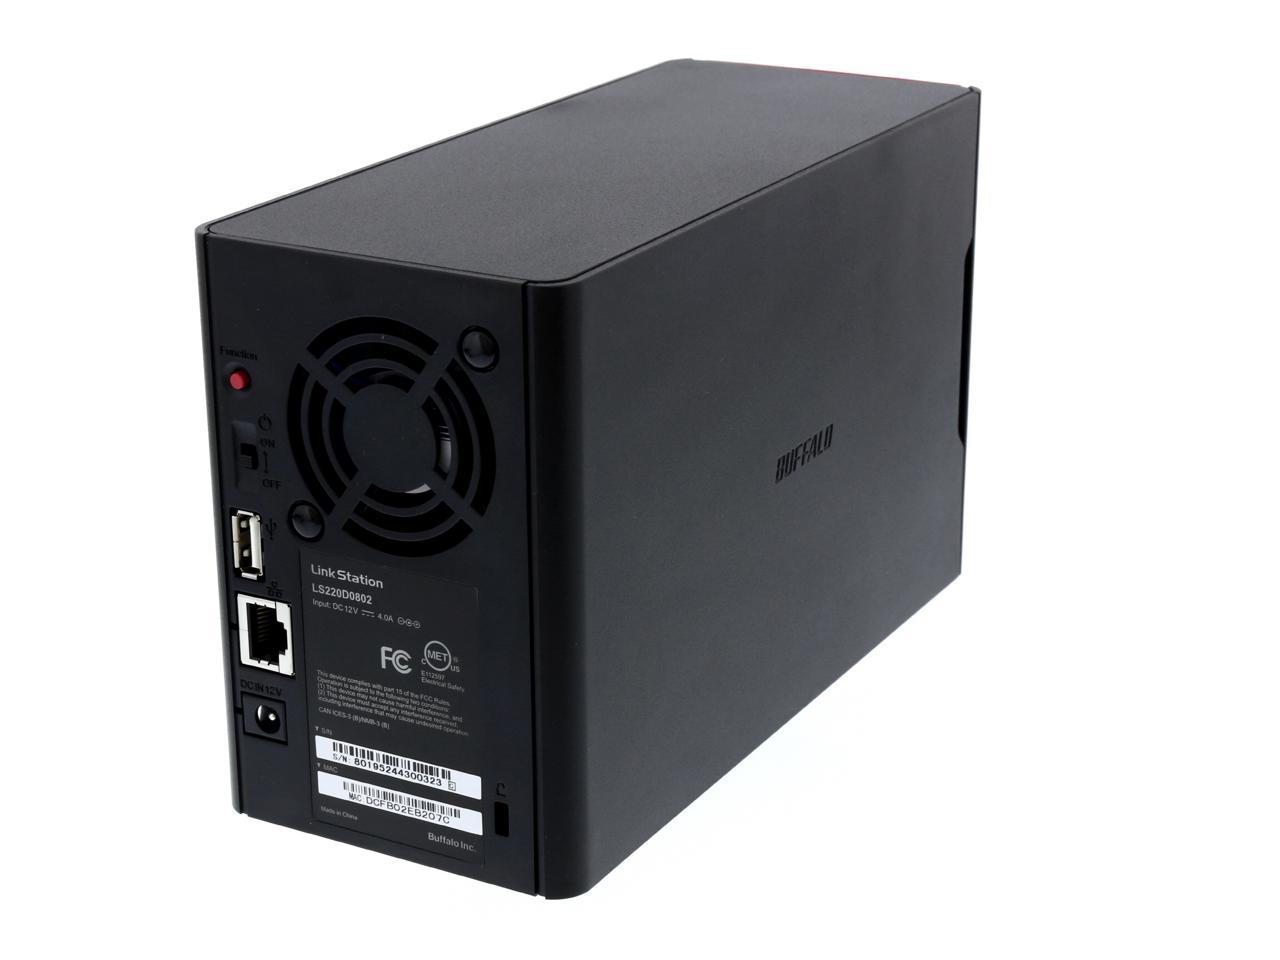 LinkStation 220 Personal Storage with Hard Drives Included (LS220D0802) - Newegg.com